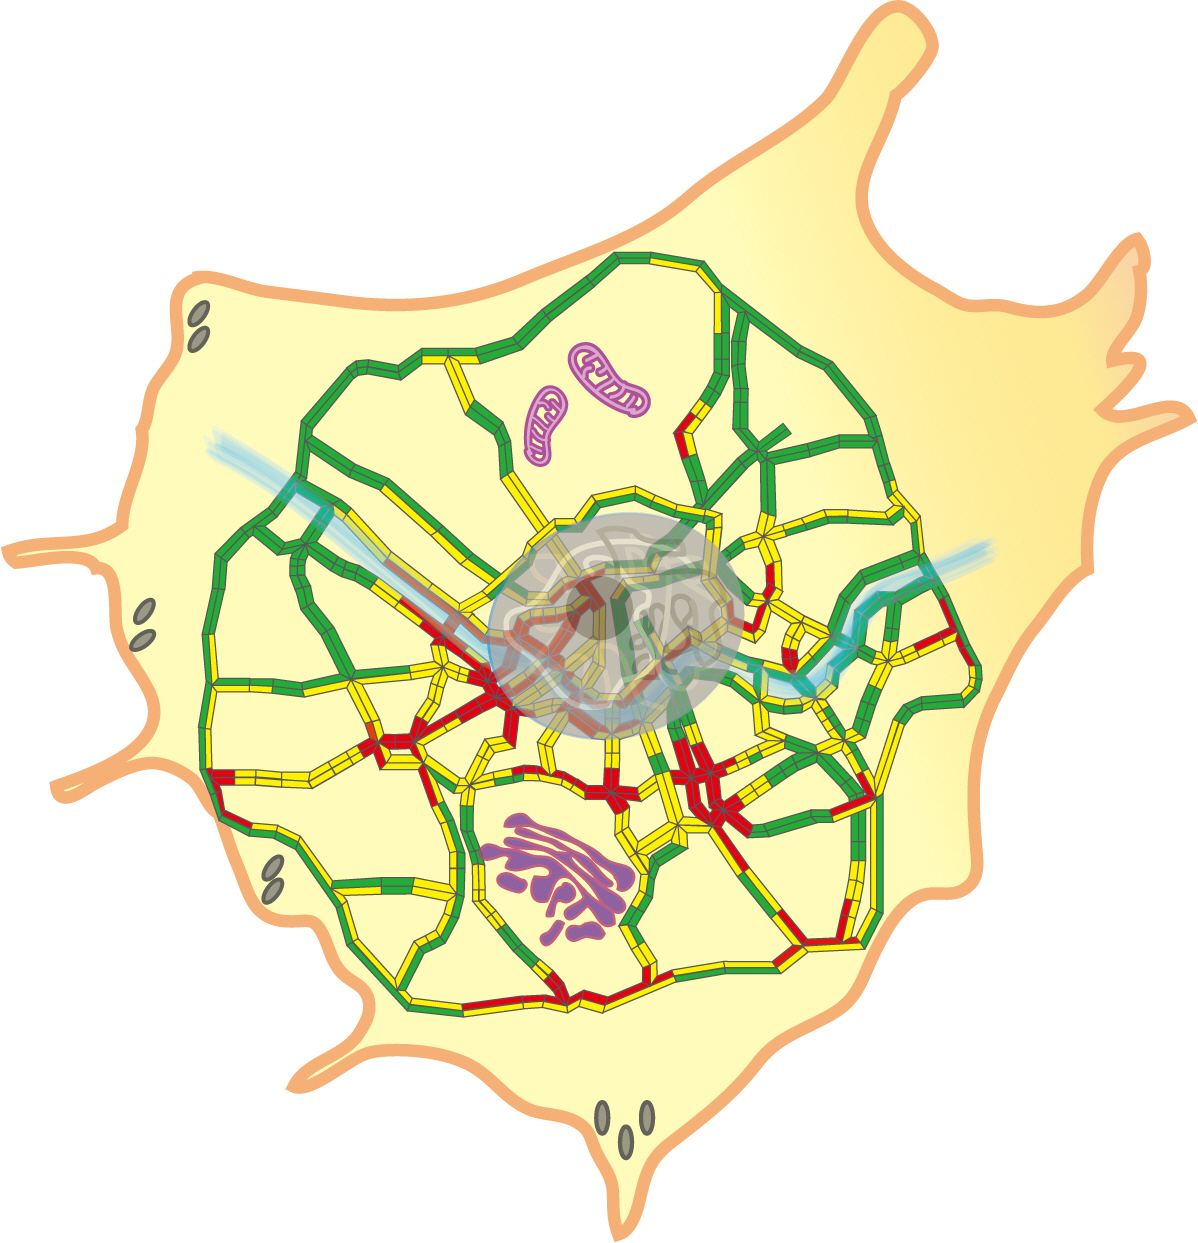 Figure 1. Schematic representation of a cellular traffic pattern drawn with the road network in and around Seoul.